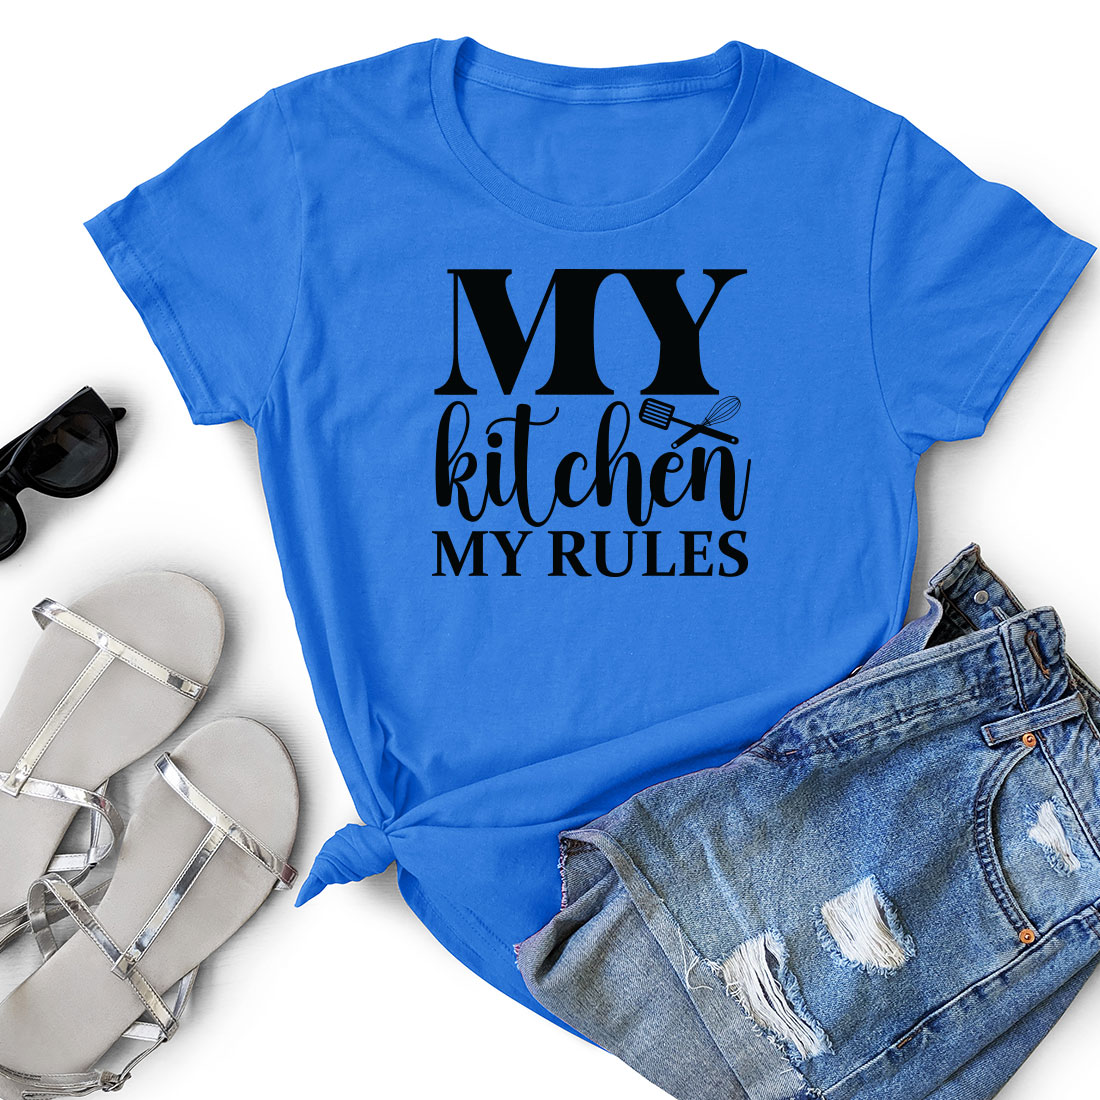 T - shirt that says my kitchen is my rules next to a pair of.